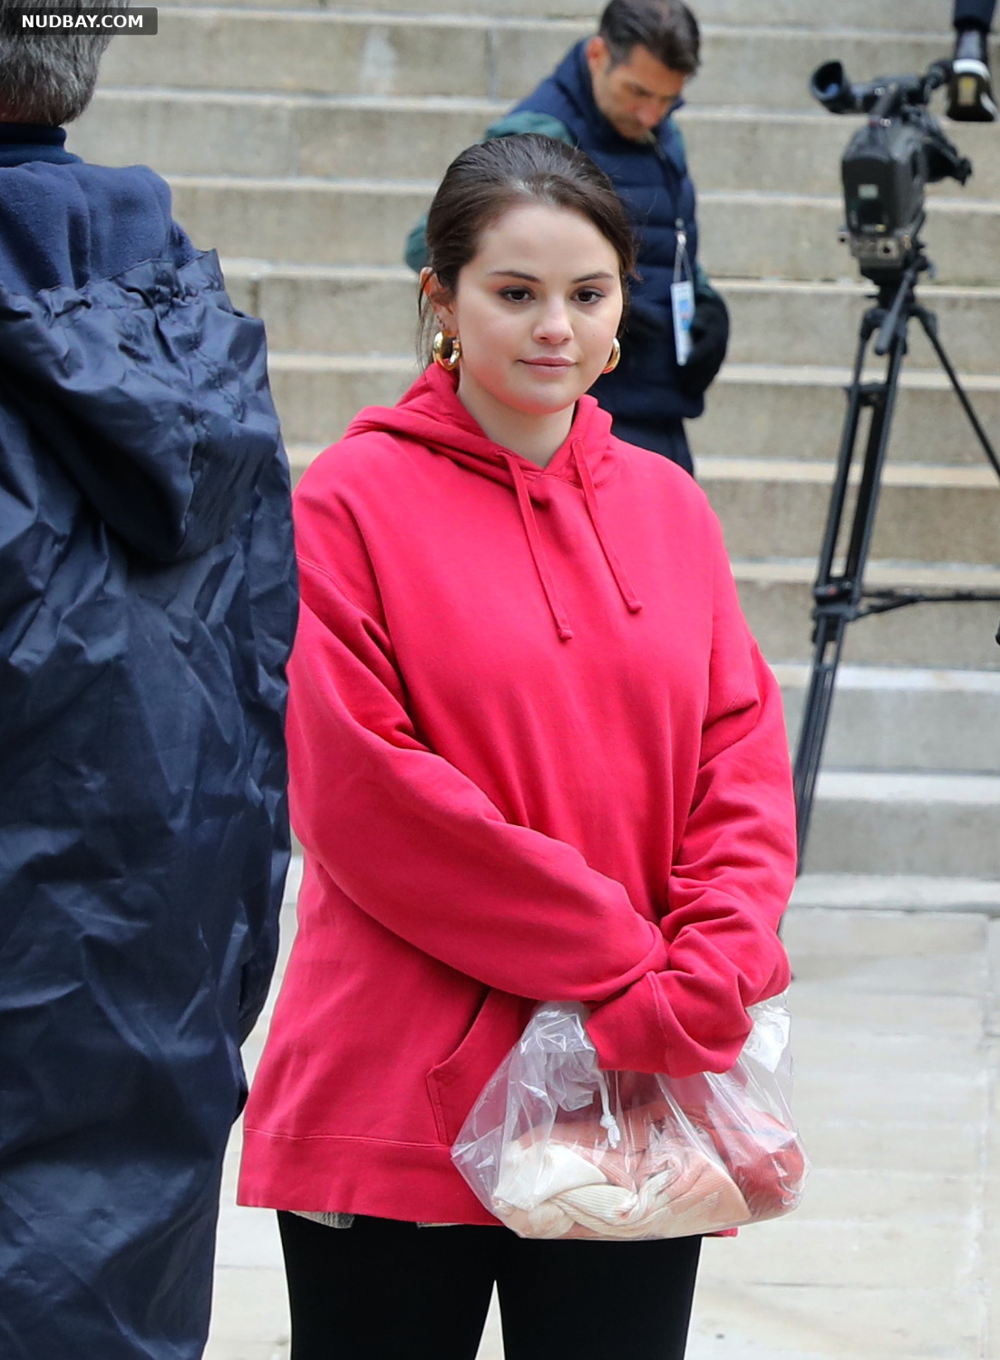 Selena Gomez on the set of Only Murders In The Building in New York Dec 08 2021